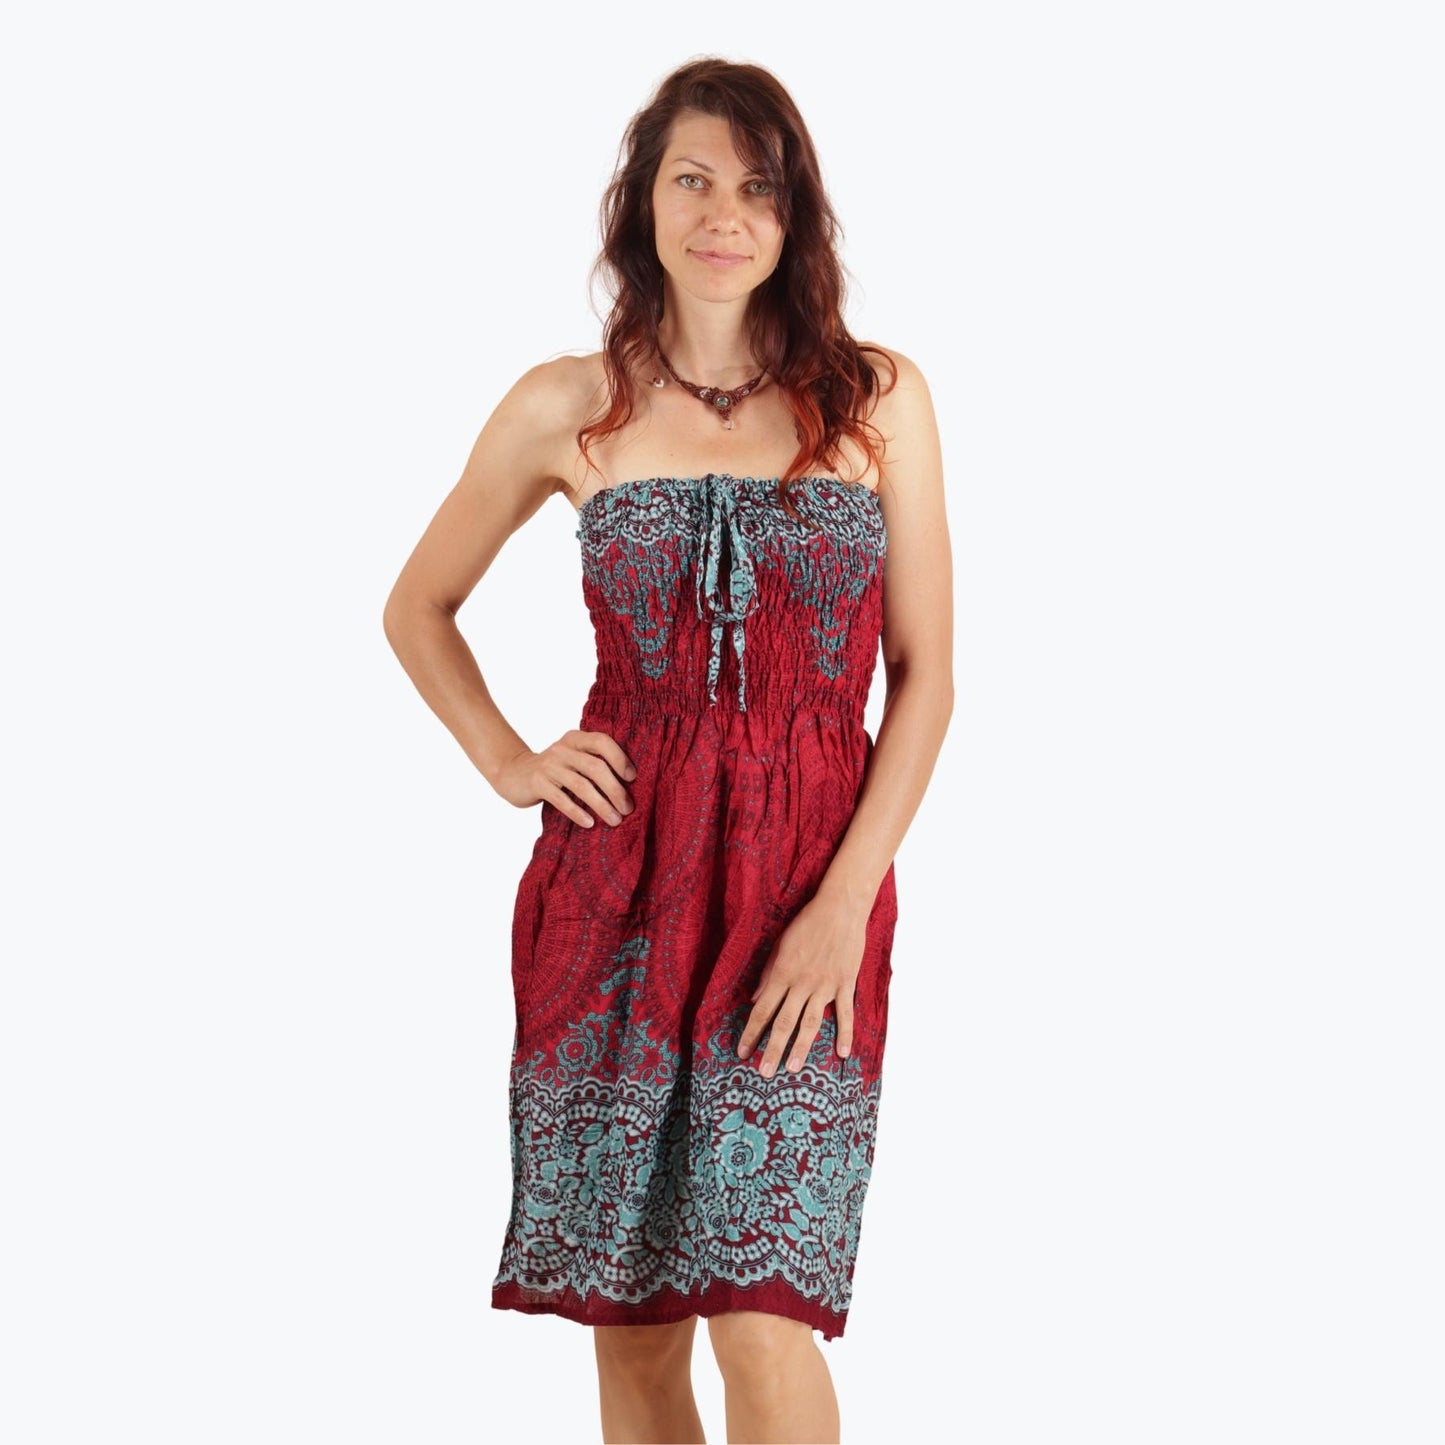 Freely dress - Red-turquoise